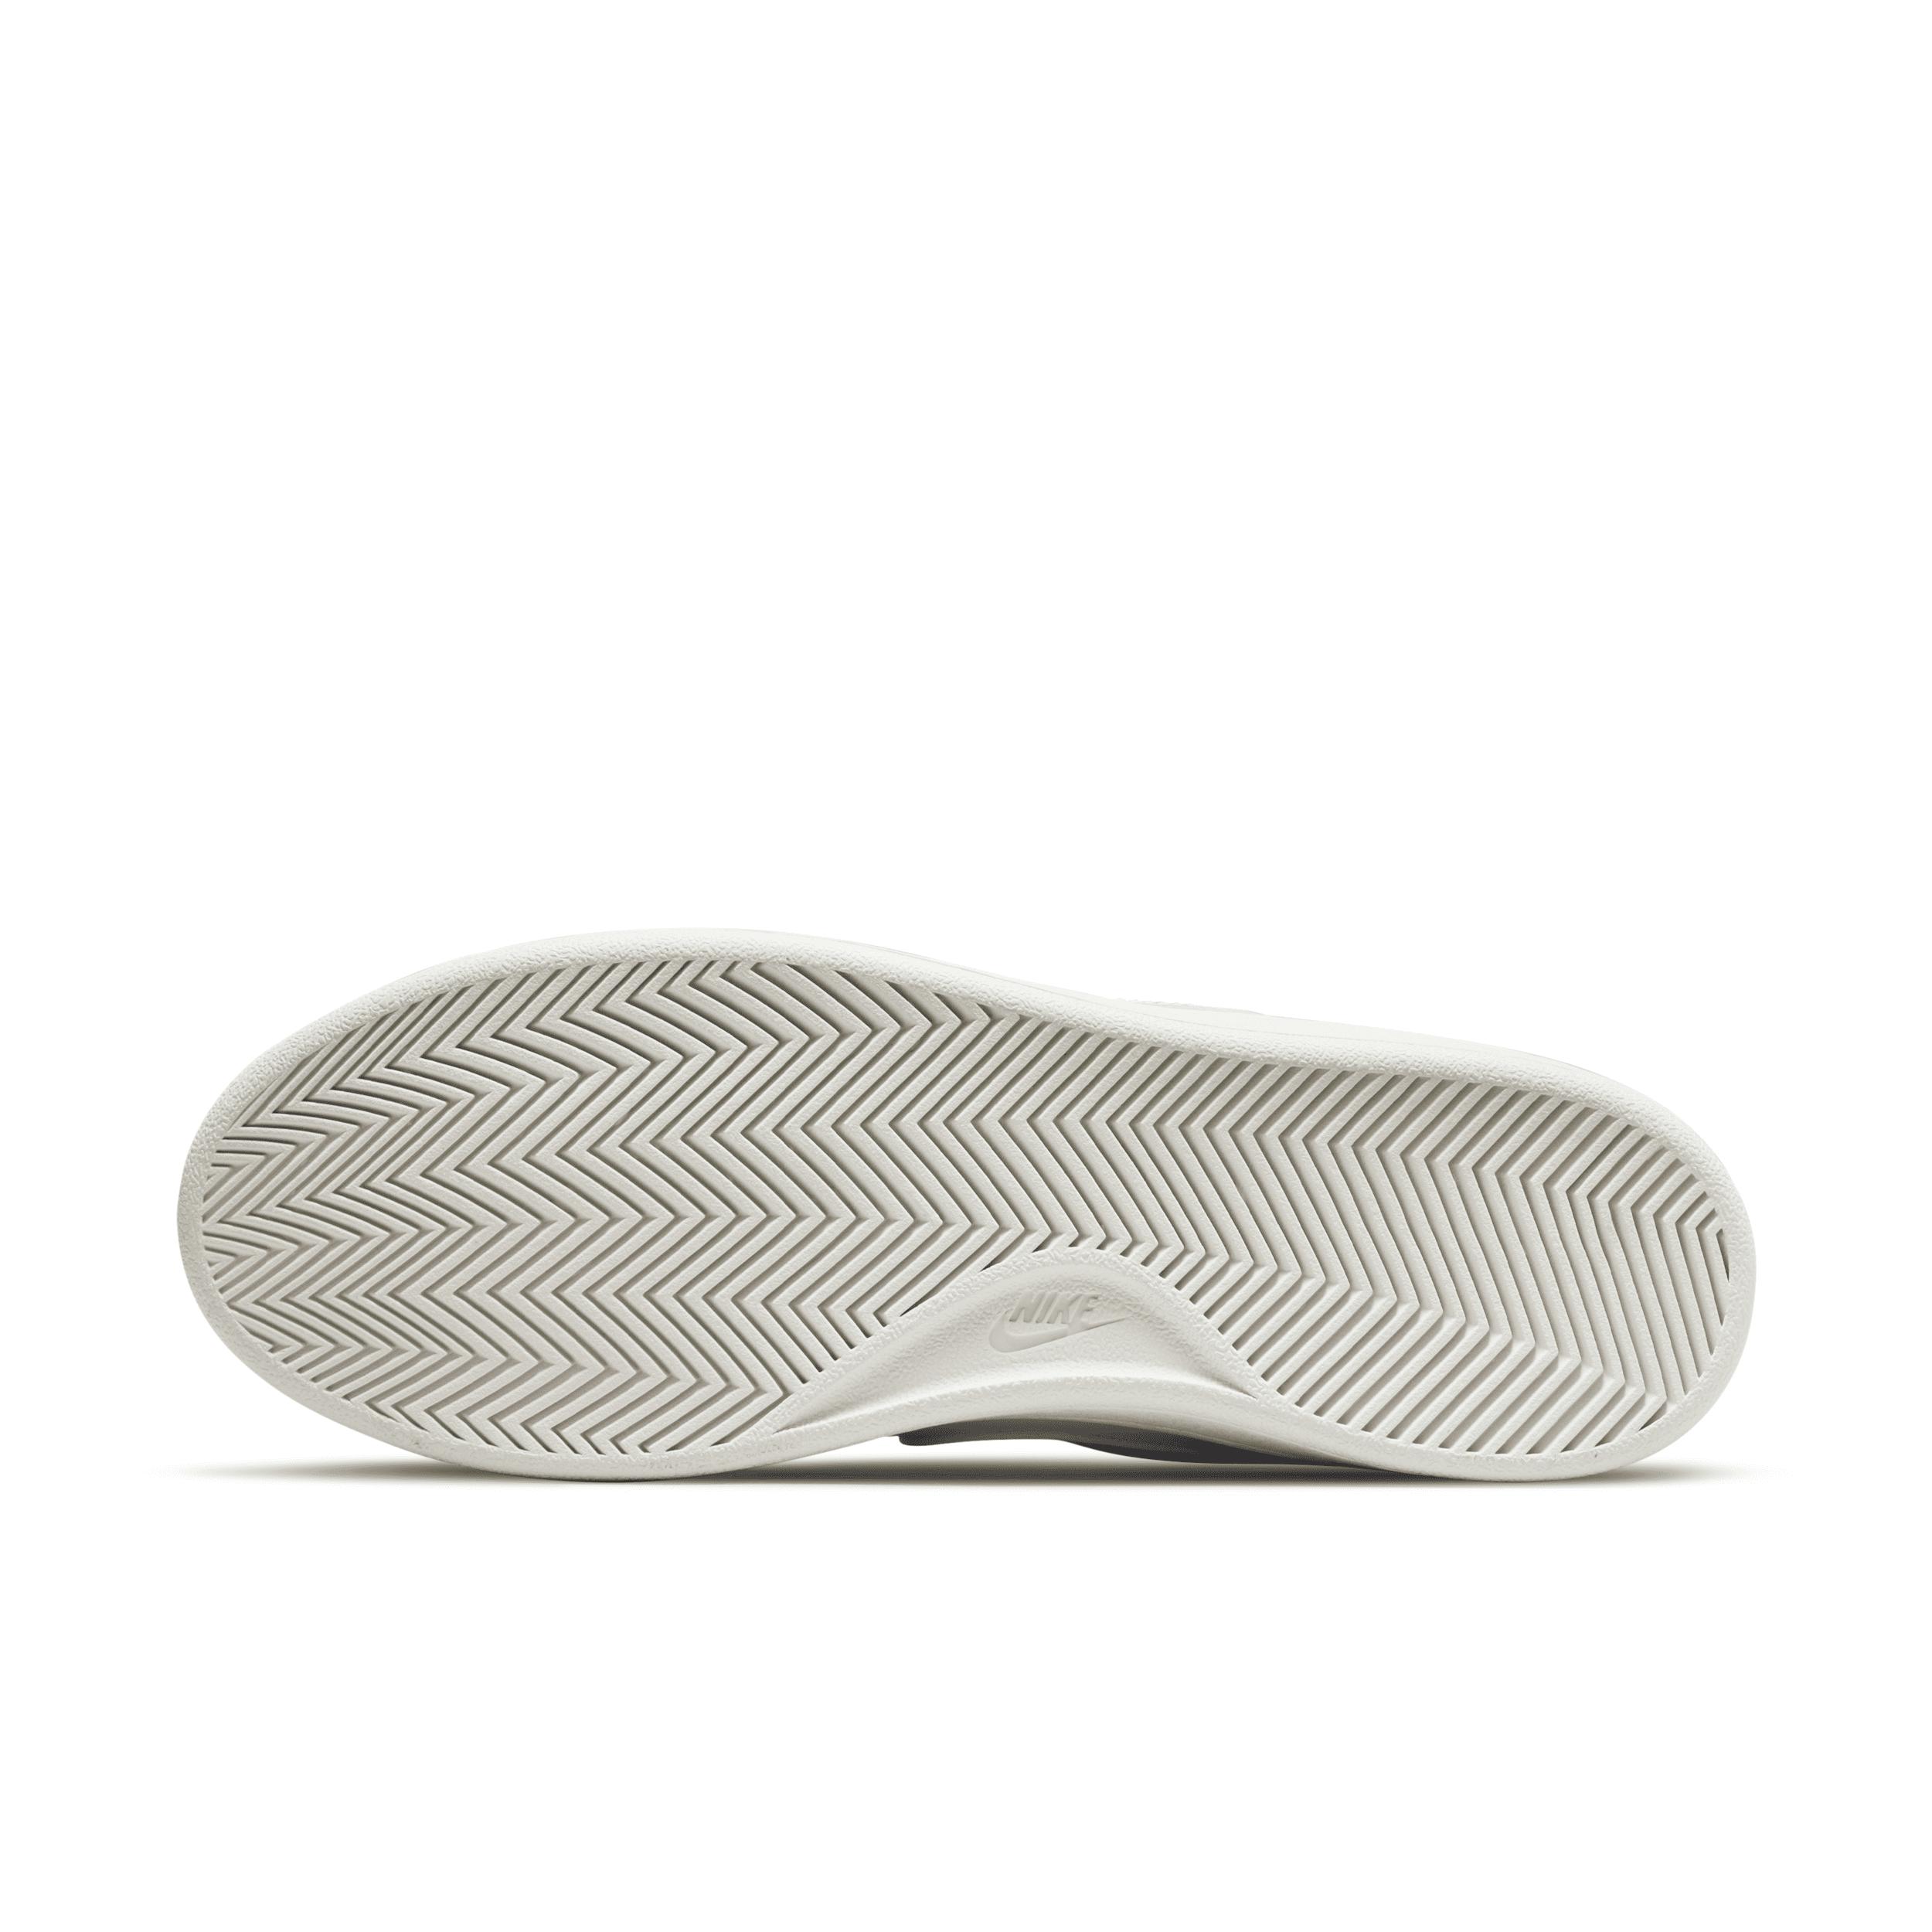 Nike Court Royale 2 Mid Shoe in White | Lyst